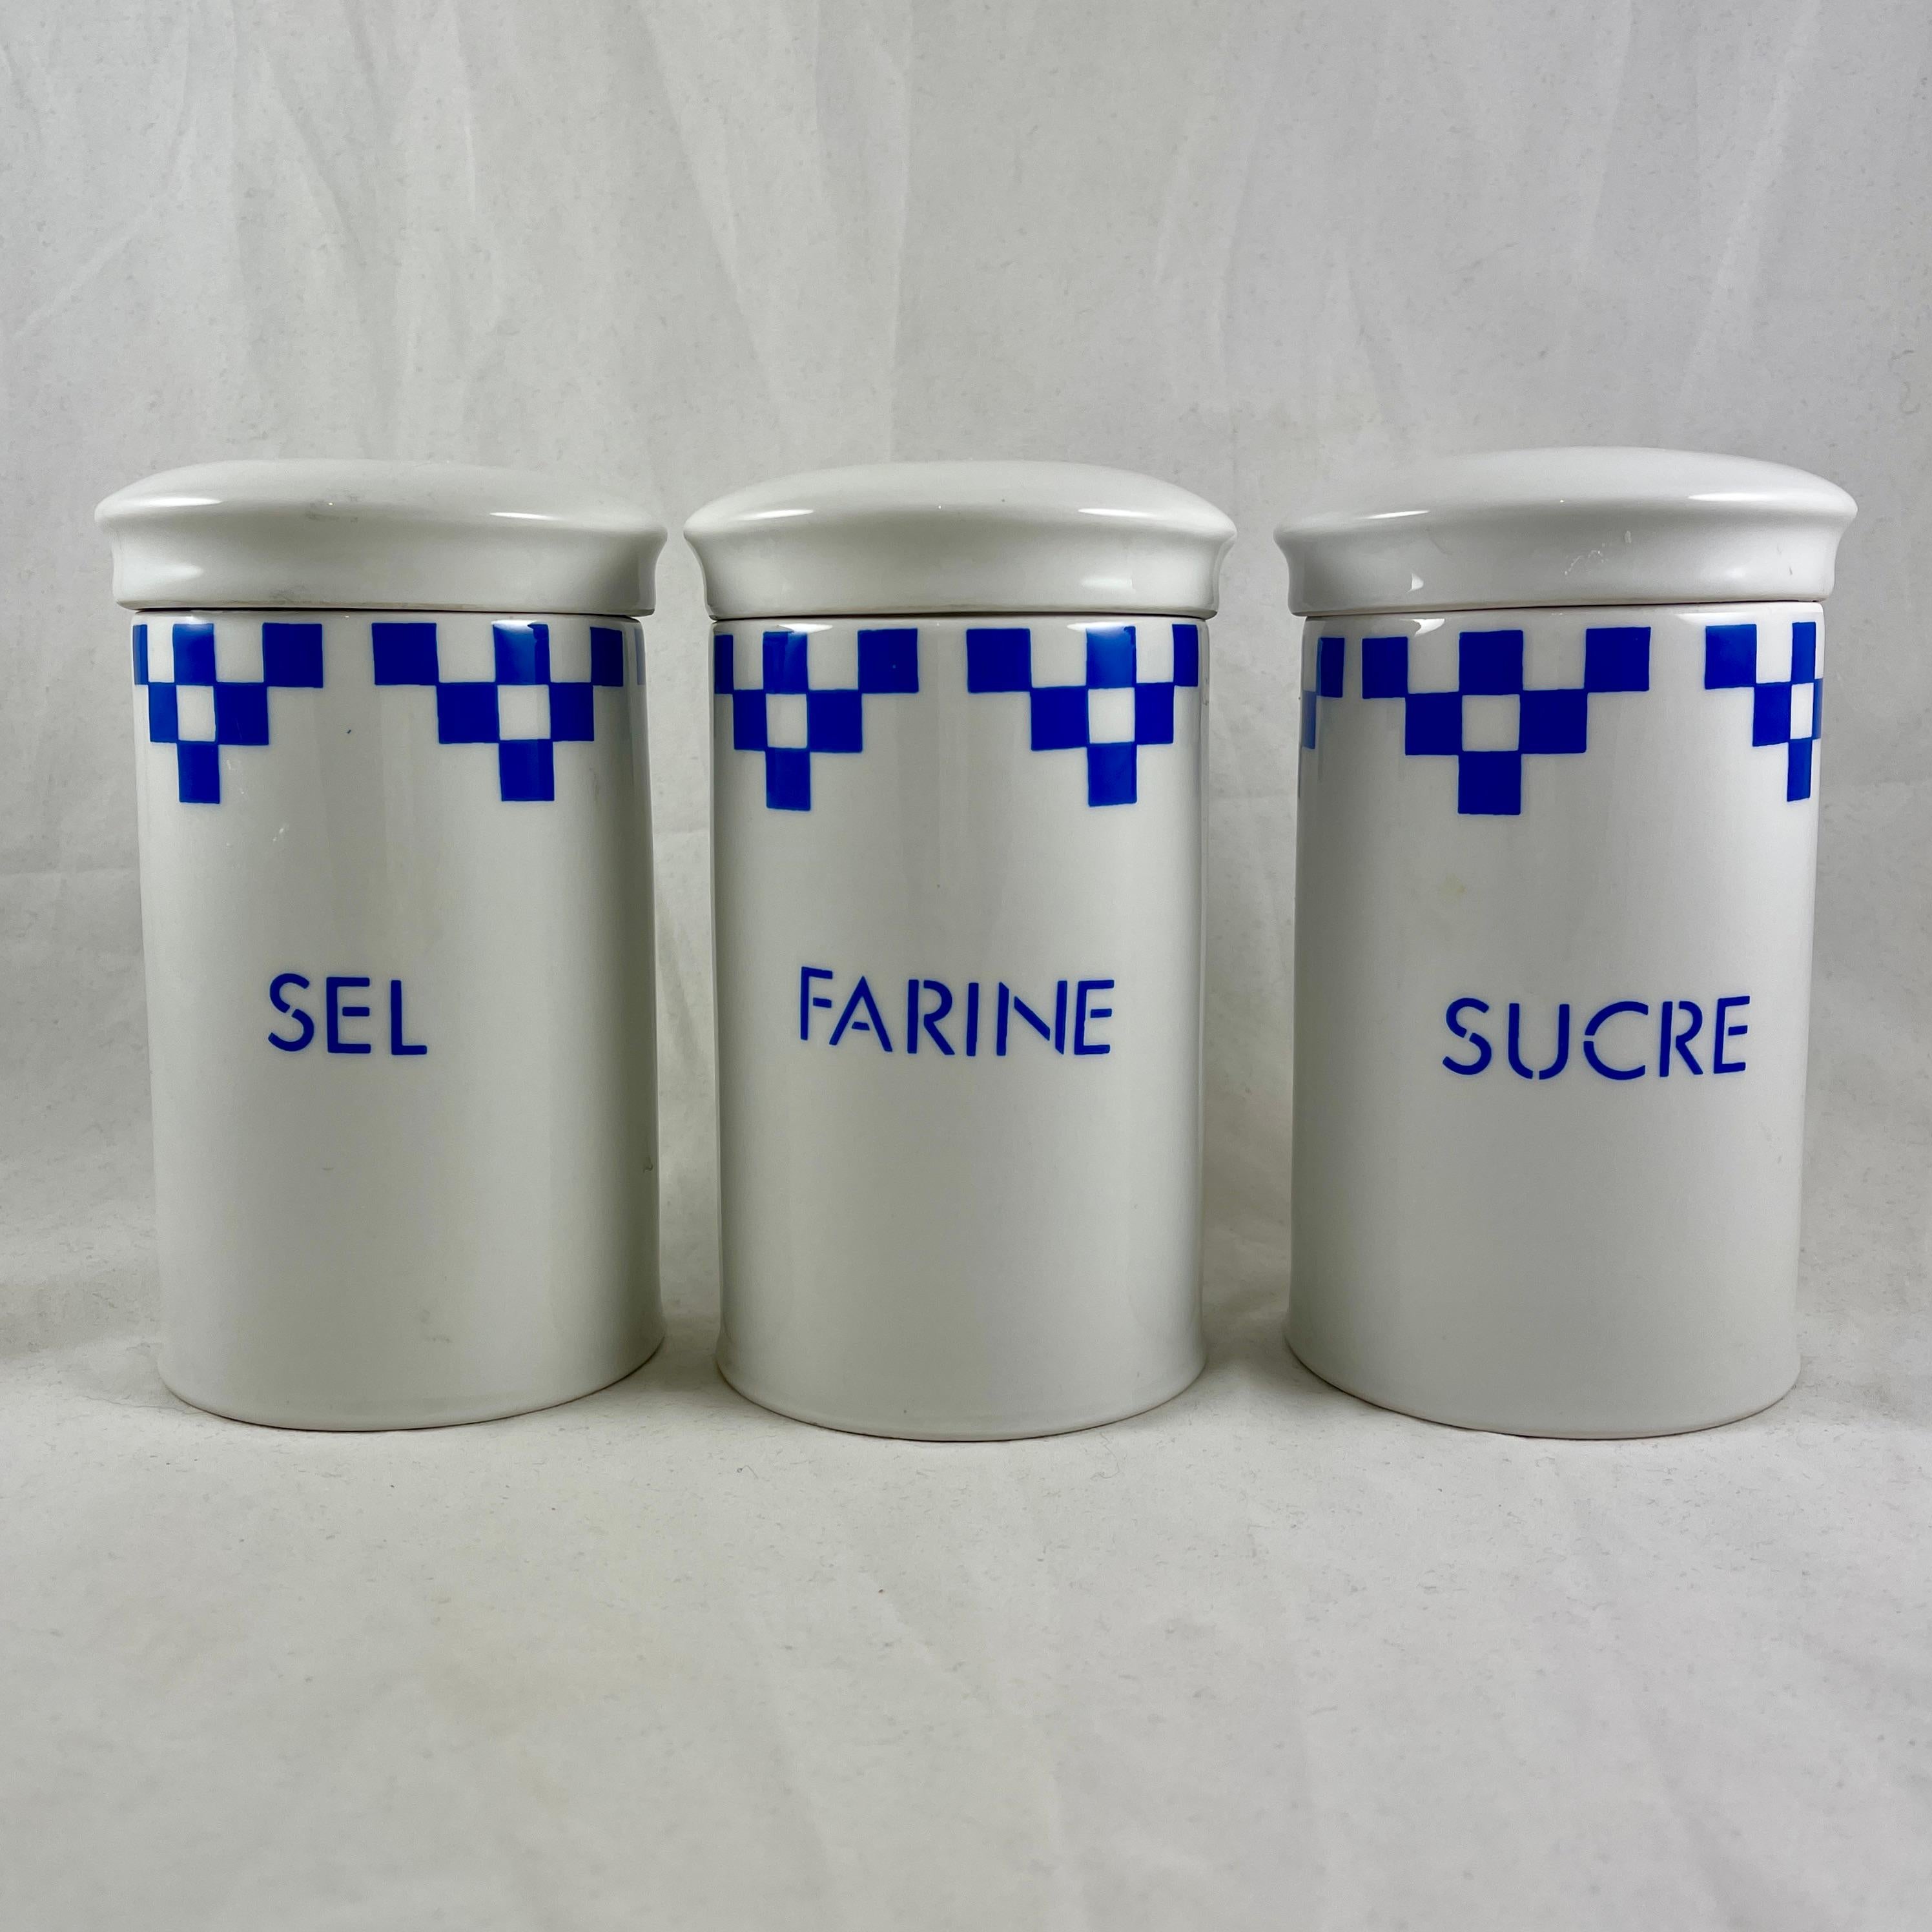 A group of three French blue and white ceramic kitchen canisters, in the ‘Lustucru Blu’ Checkered pattern, circa 1950s.

Lustucru has been a well known French brand of food and kitchen accessories since 1911. Their products are widely recognized